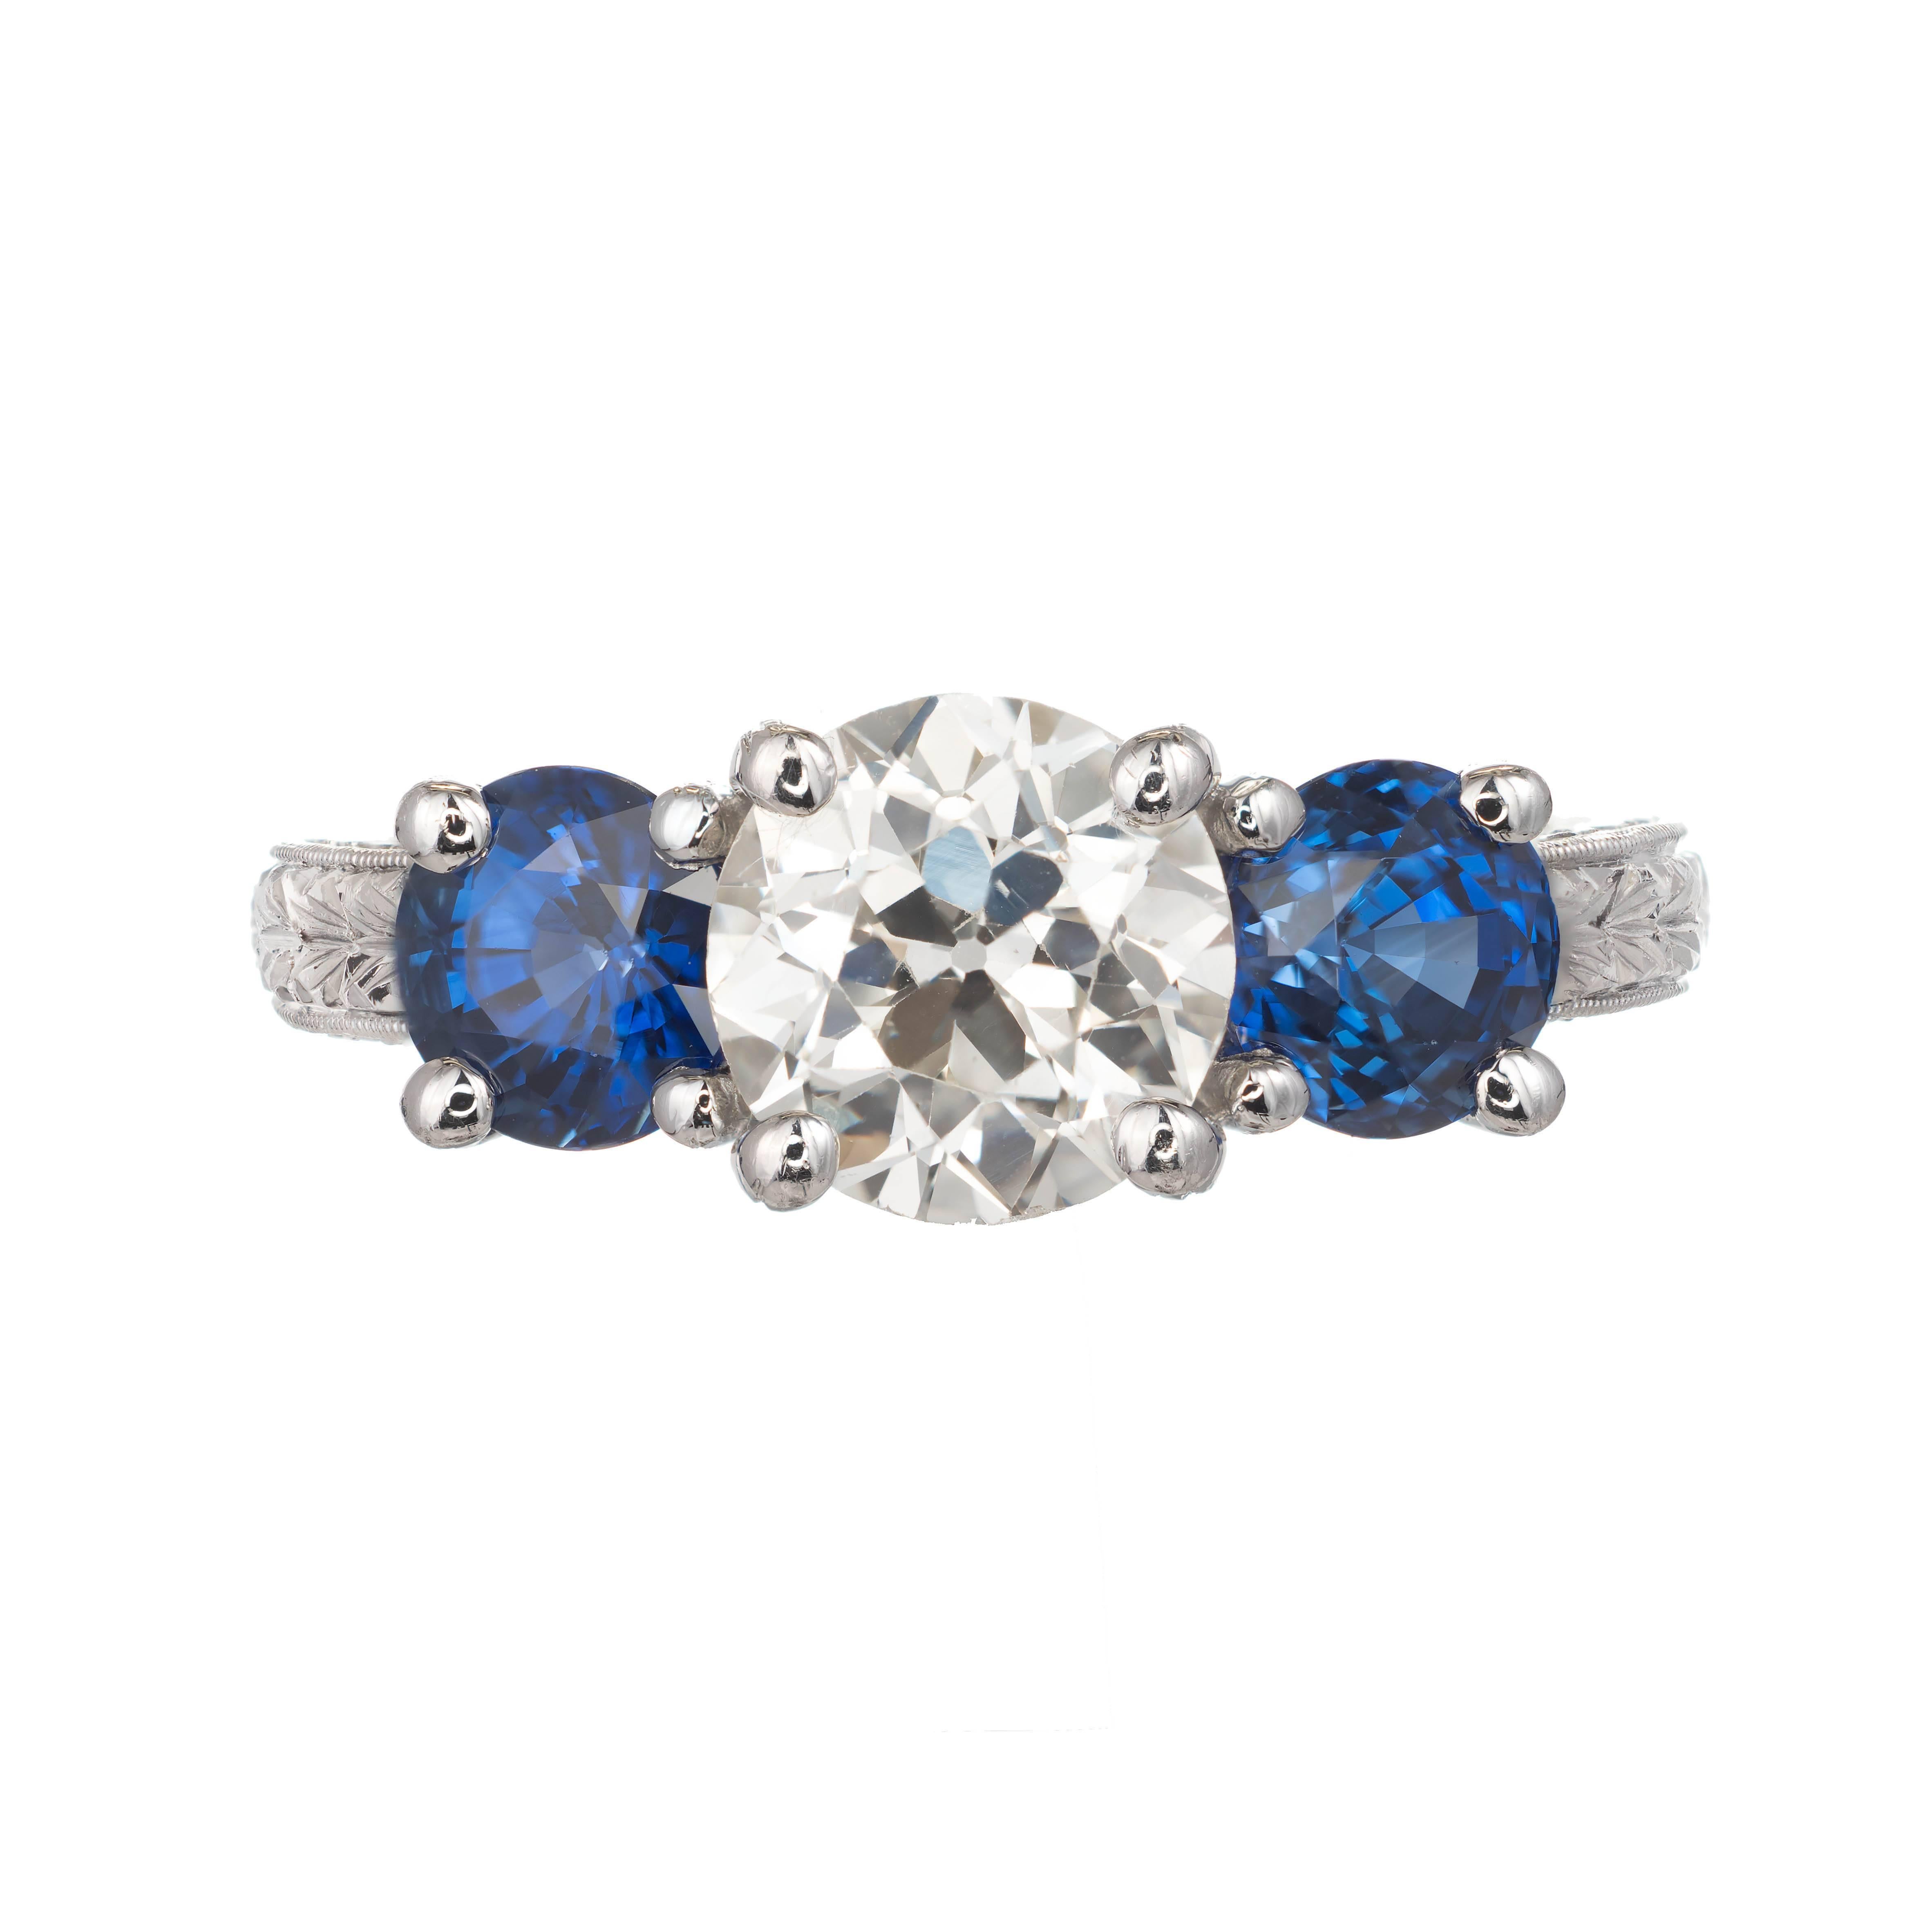 Peter Suchy diamond and sapphire three-stone engagement ring. 1.50cts Original European cut diamond complete with a raised crown and small table, Certified by the EGL as Old European cut.  Set with 2 extremely bright vivid blue European cut